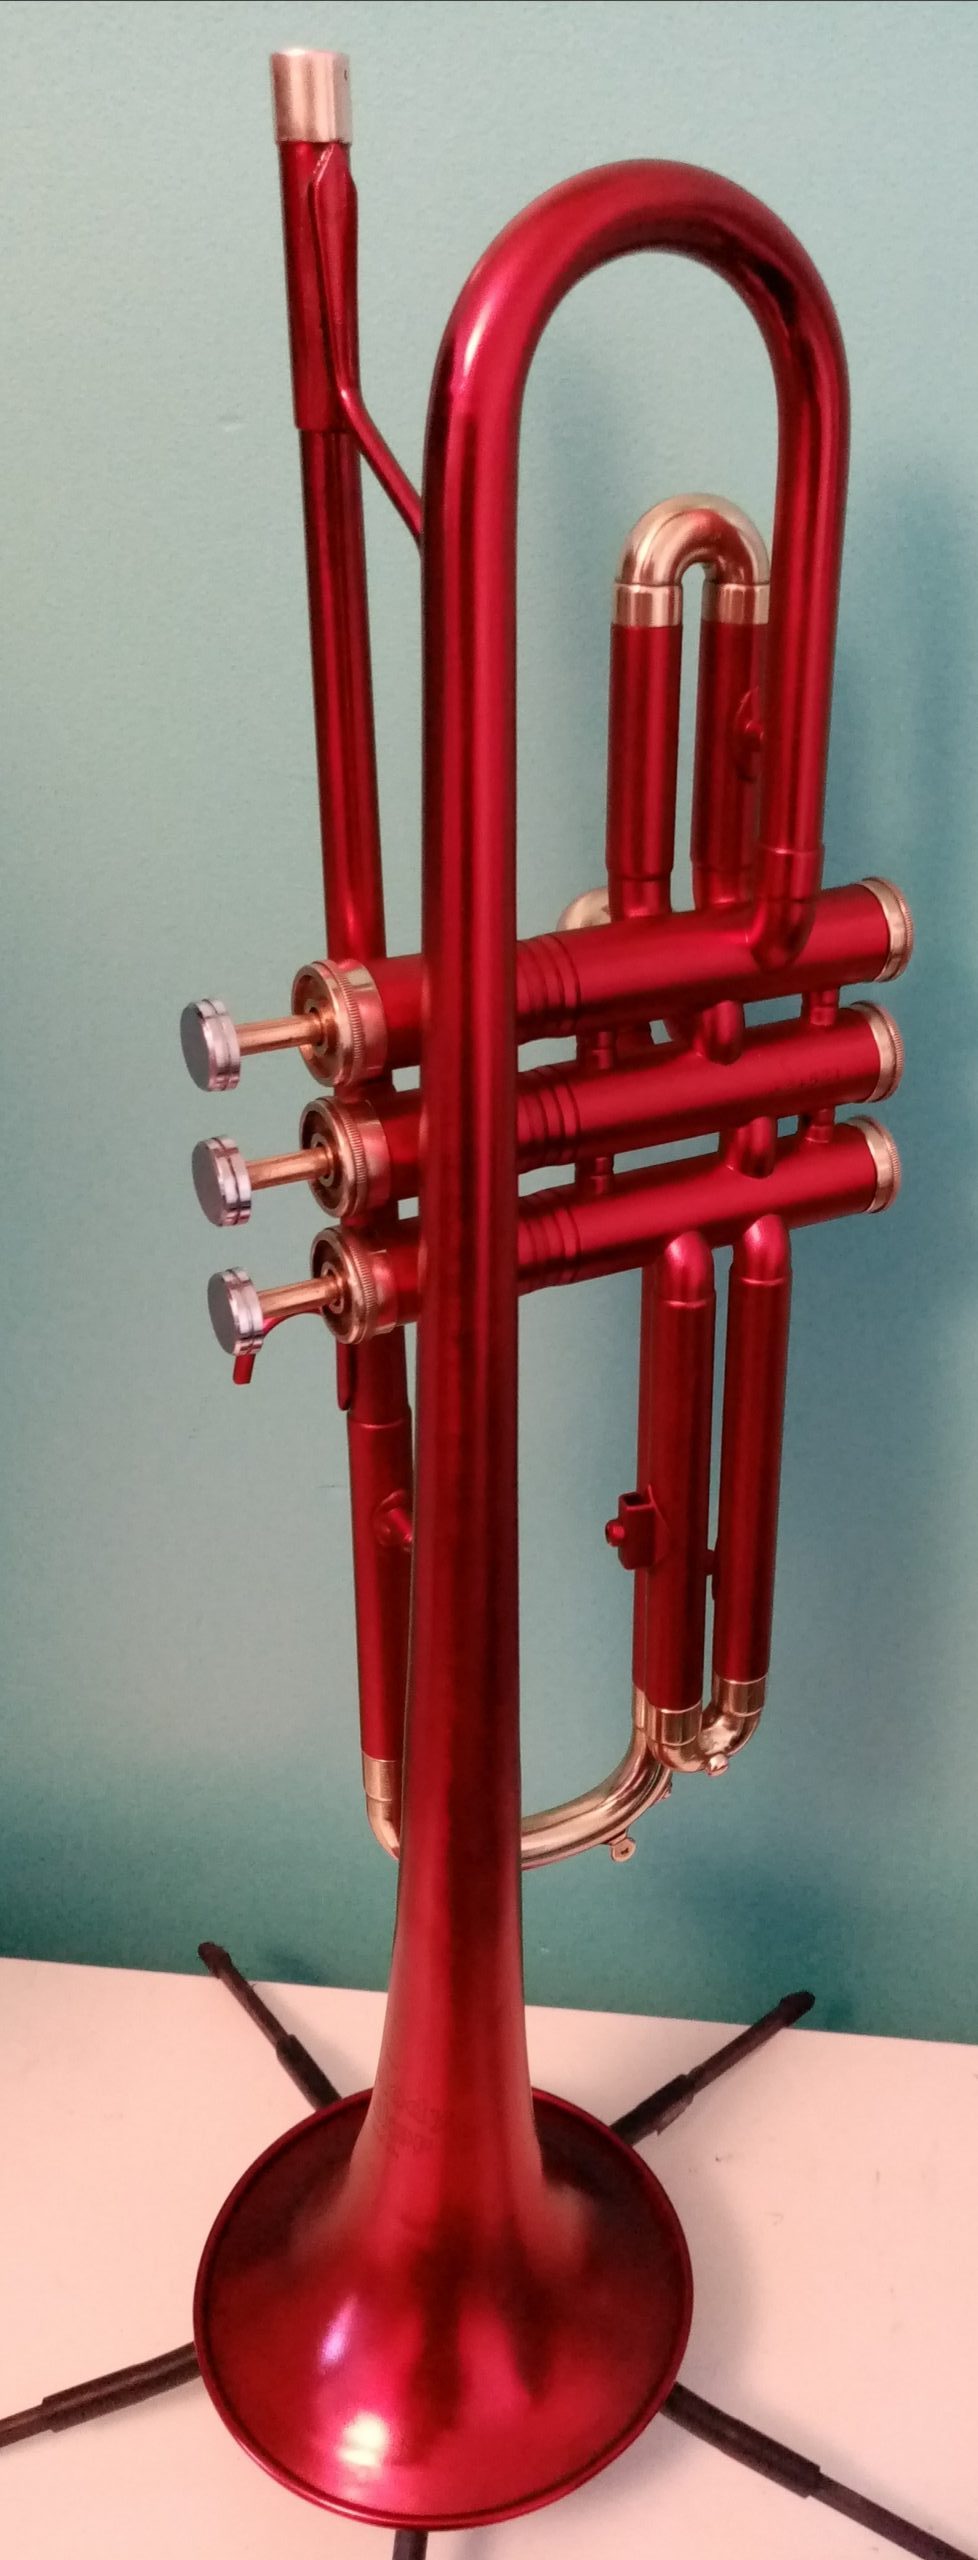 red lacquer trumpet during